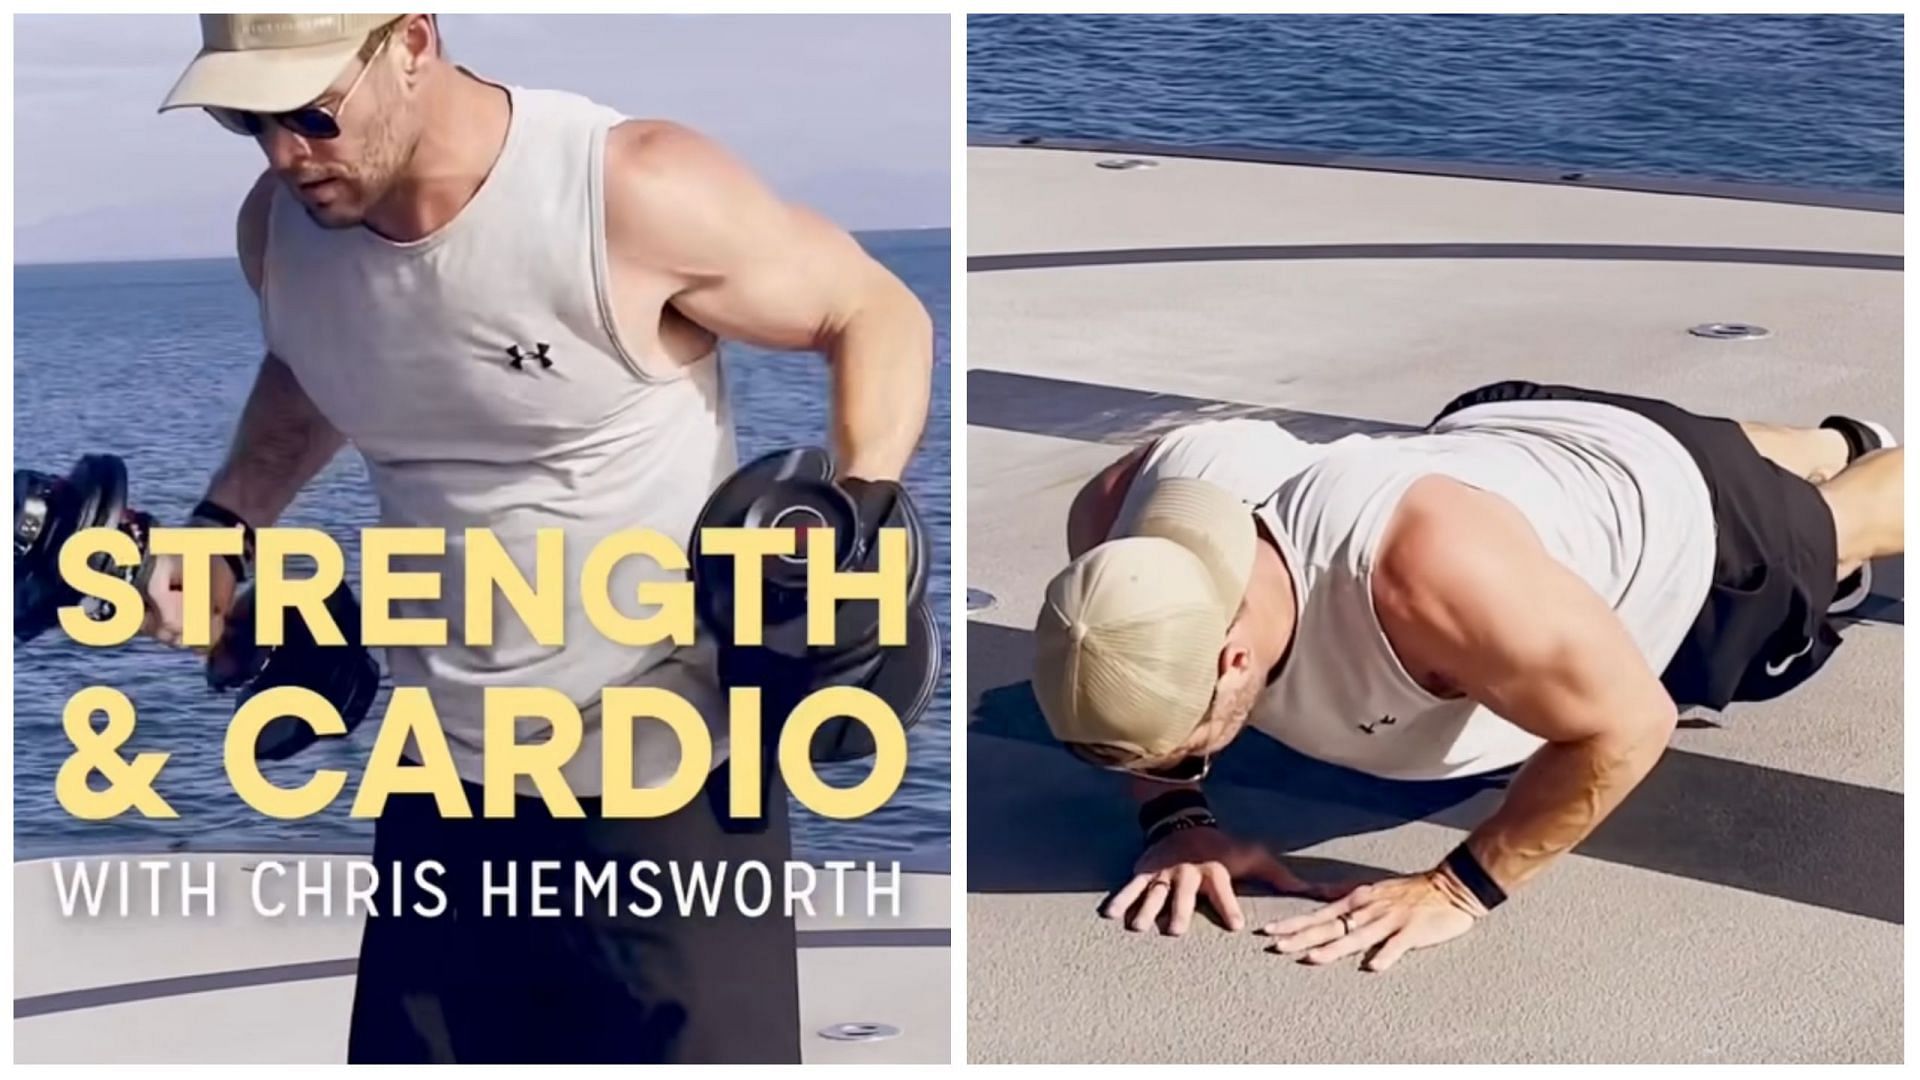 Want to build explosive strength? Try Centr Workout Challenge with Chris Hemsworth. (Image via Instagram @chrishemsworth)